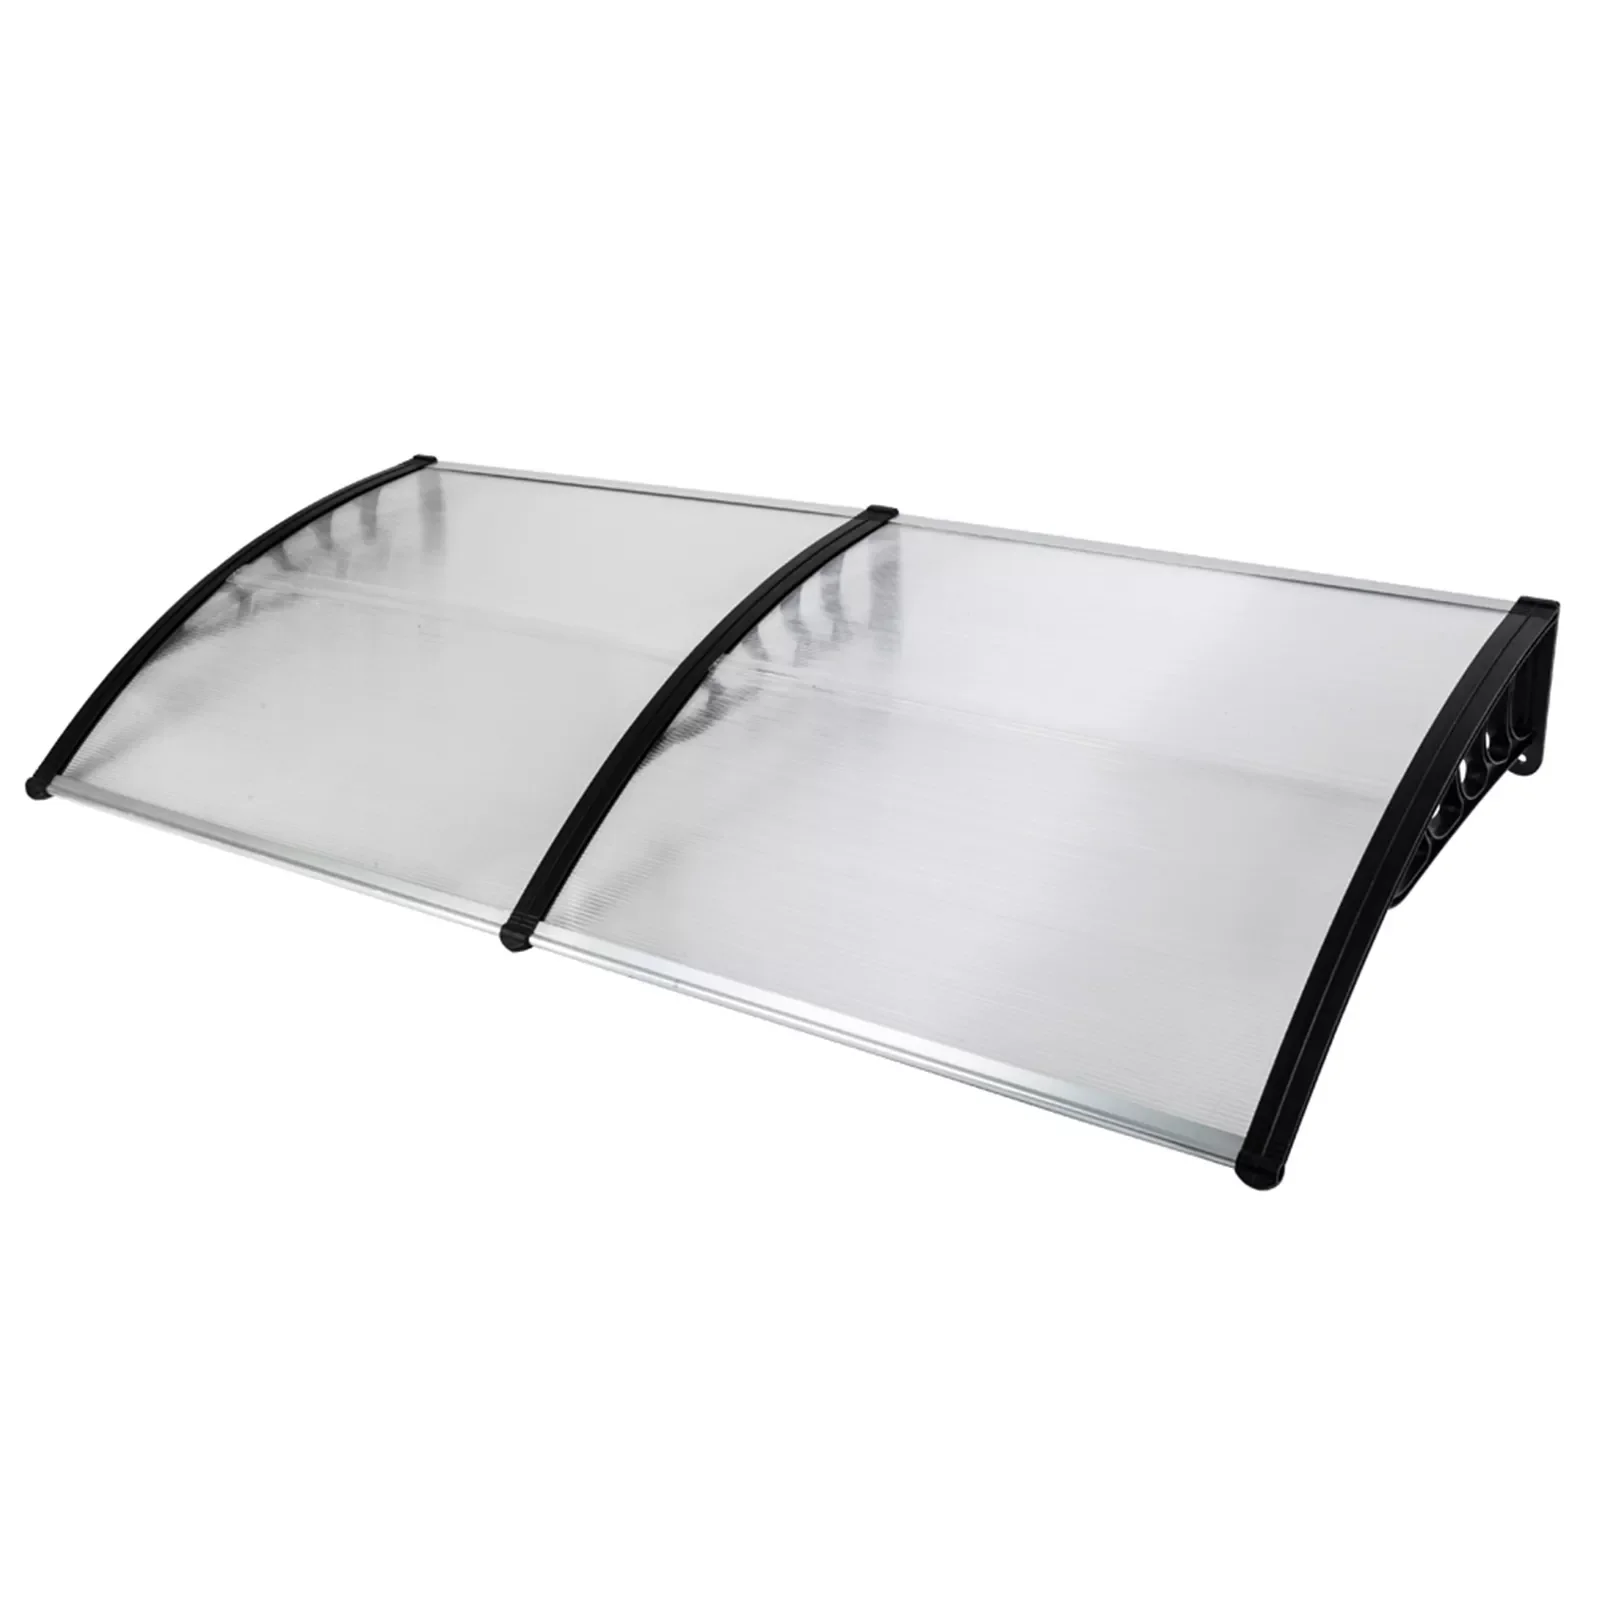 

1PC Awning Door Window Rain Cover Window Eaves Front Door Outdoor Patio Canopy Sun Shelter for Household Application